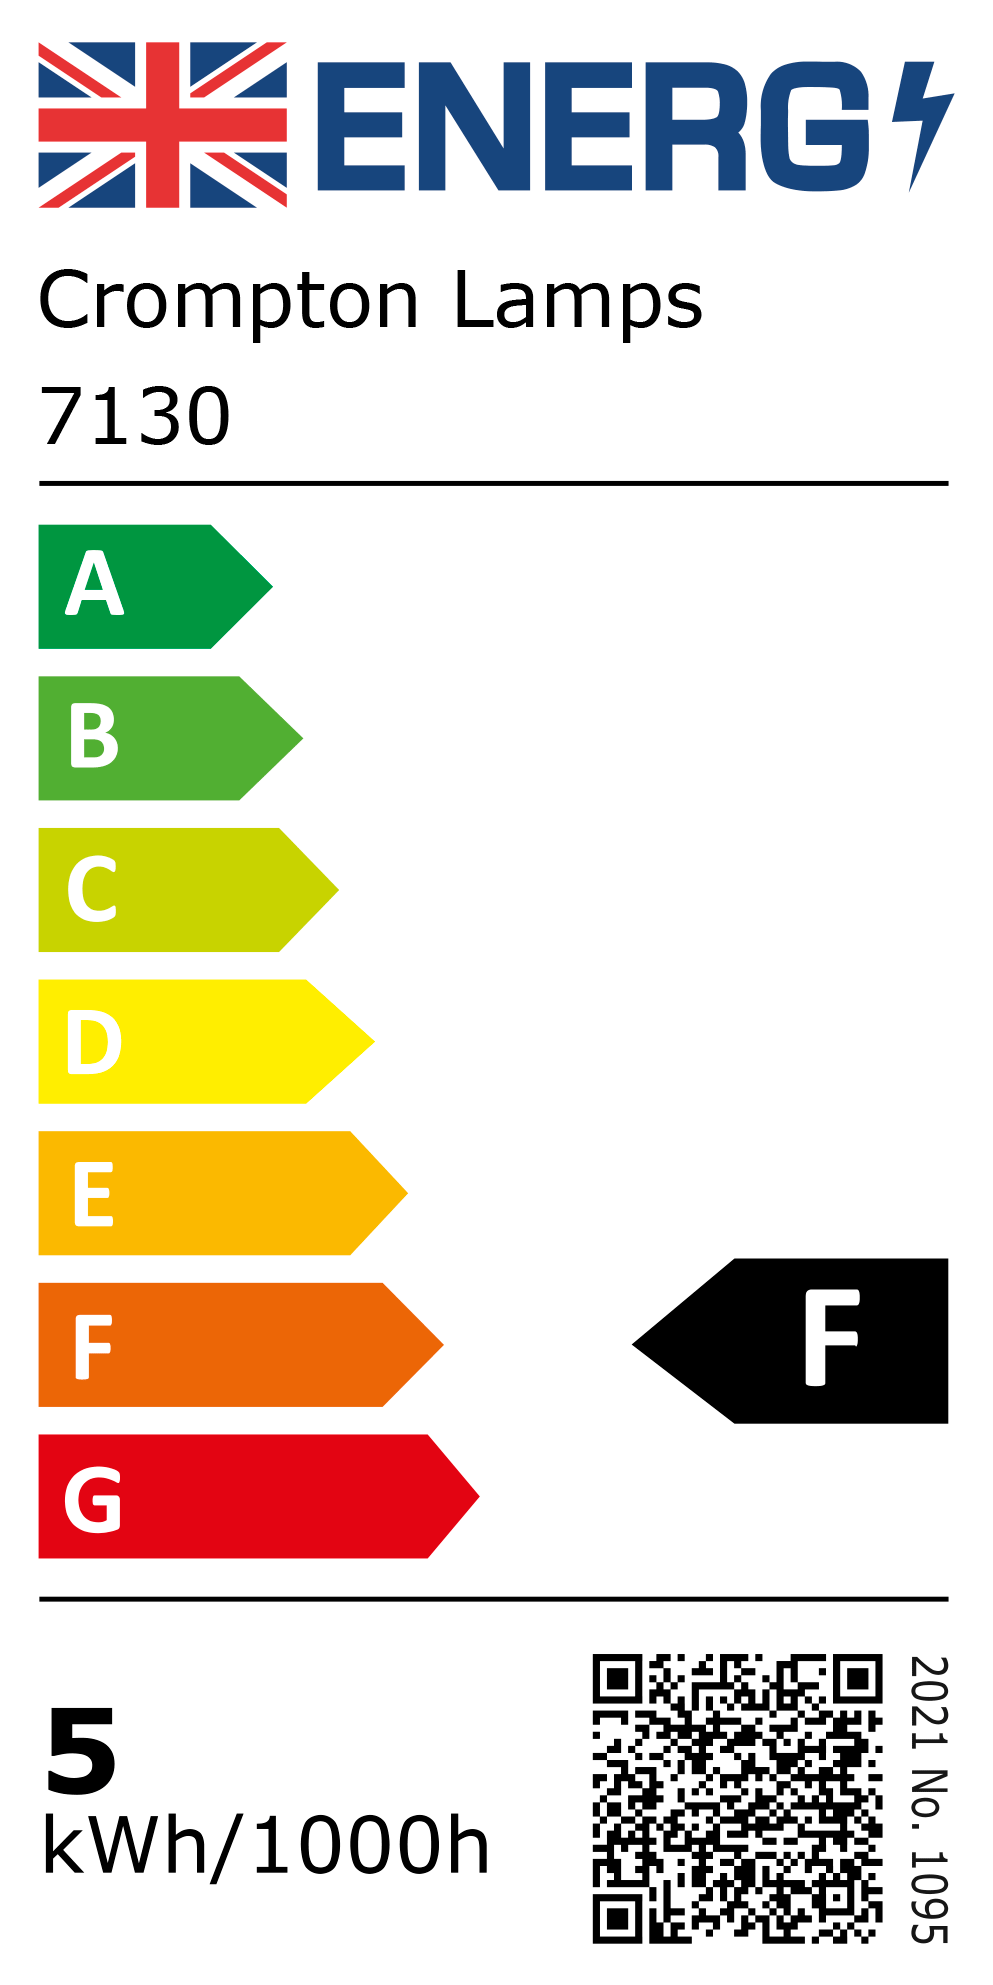 New 2021 Energy Rating Label: Stock Code 7130